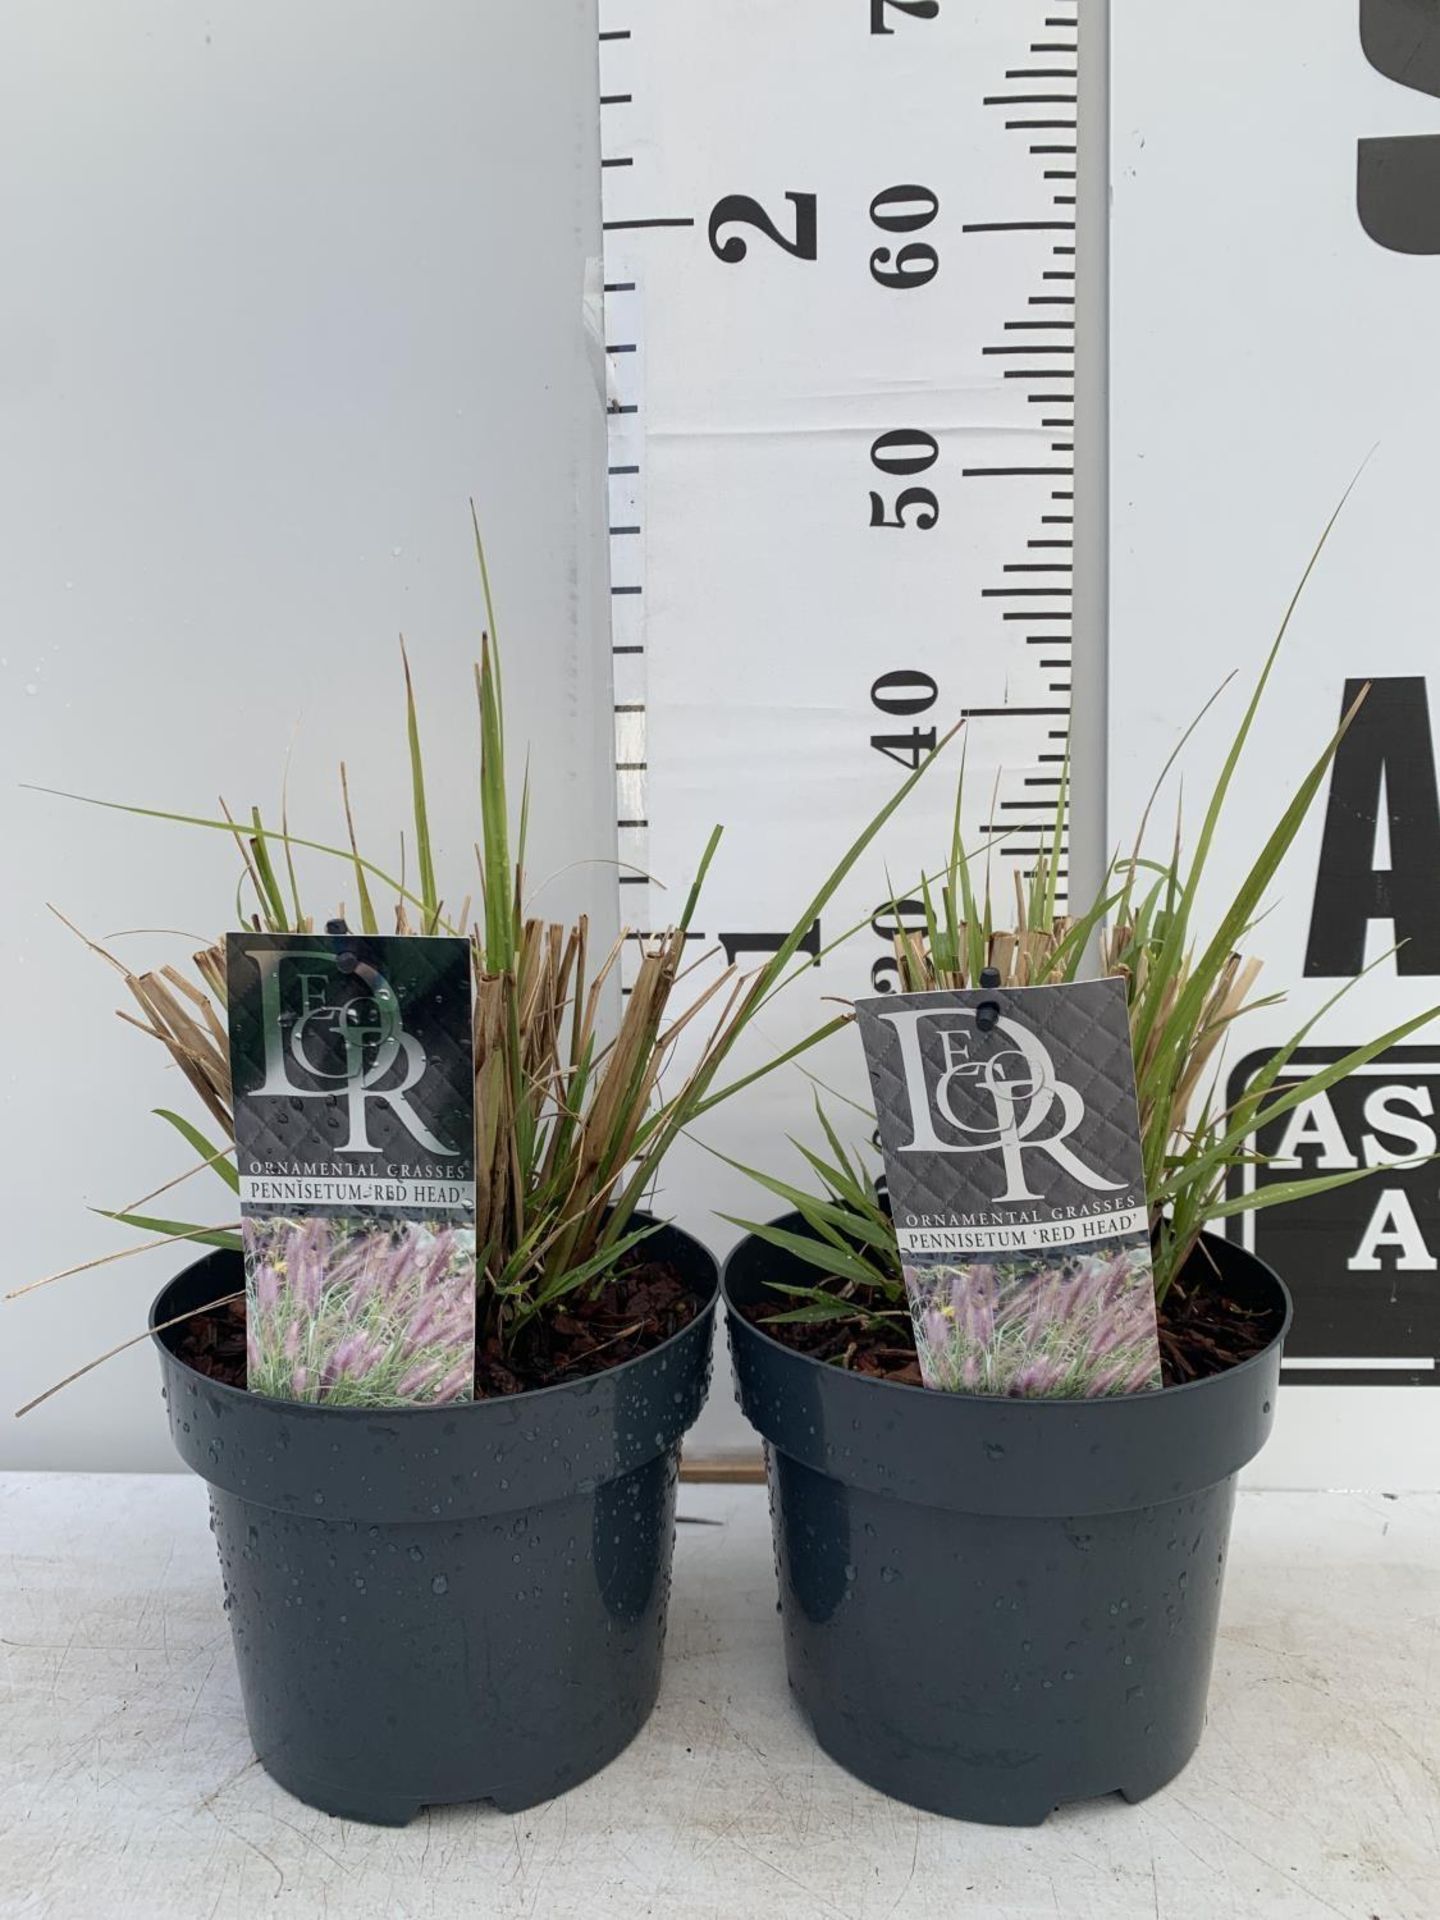 TWO ORNAMENTAL GRASSES PENNISETUM 'REDHEAD' IN 4 LTR POTS APPROX 60CM IN HEIGHT PLUS VAT TO BE - Image 2 of 8